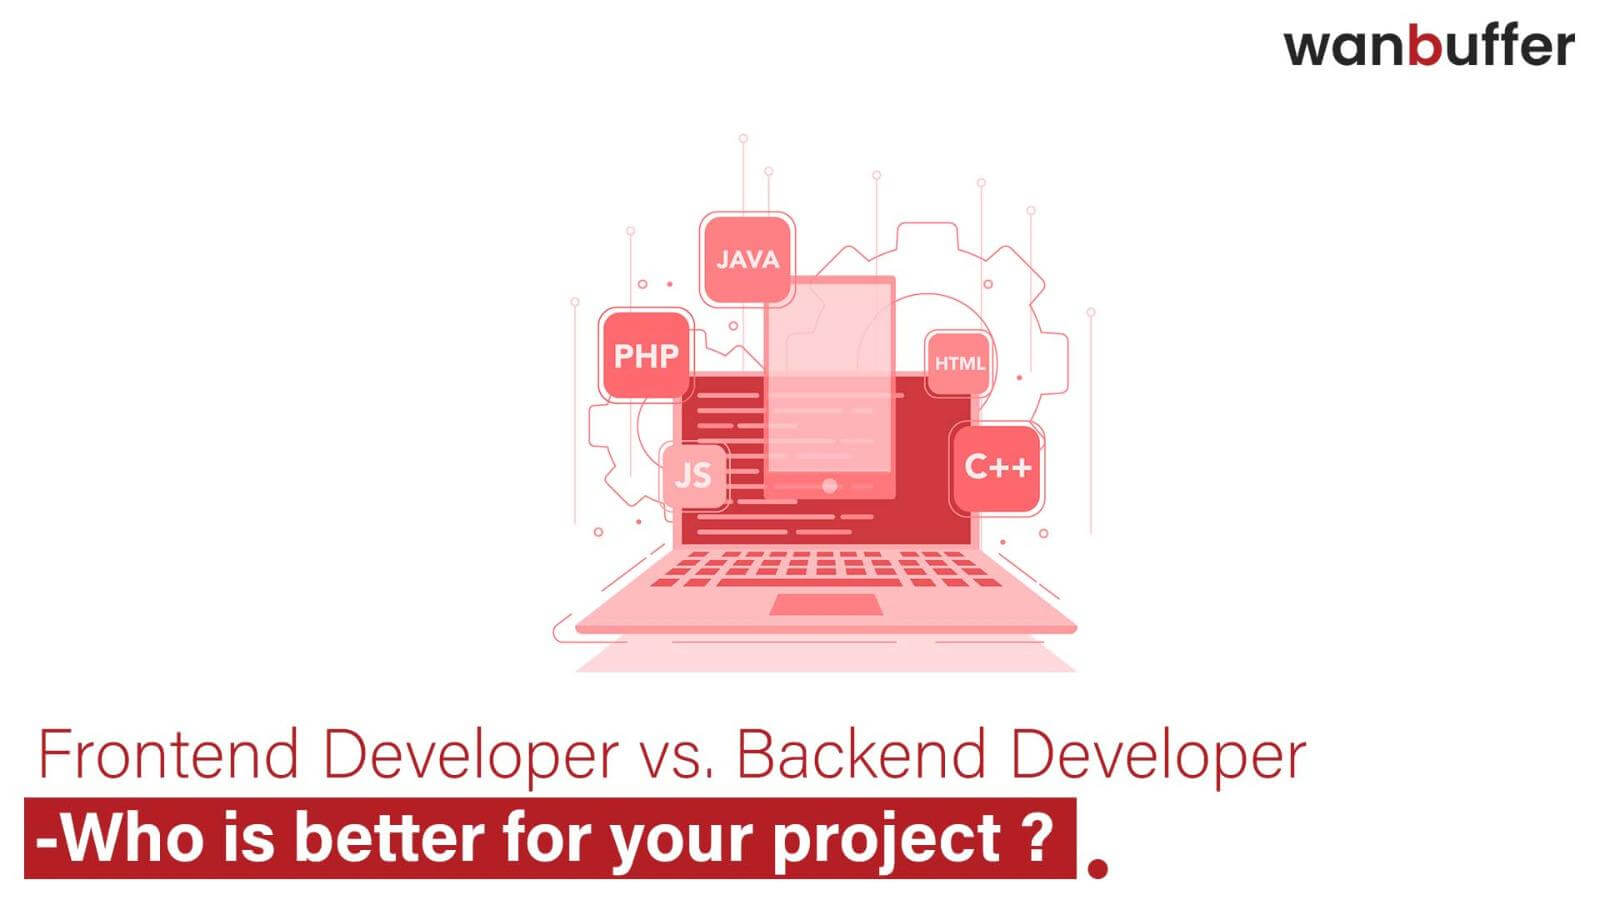 Which Developer Is Better for Your Project: Frontend or Backend?